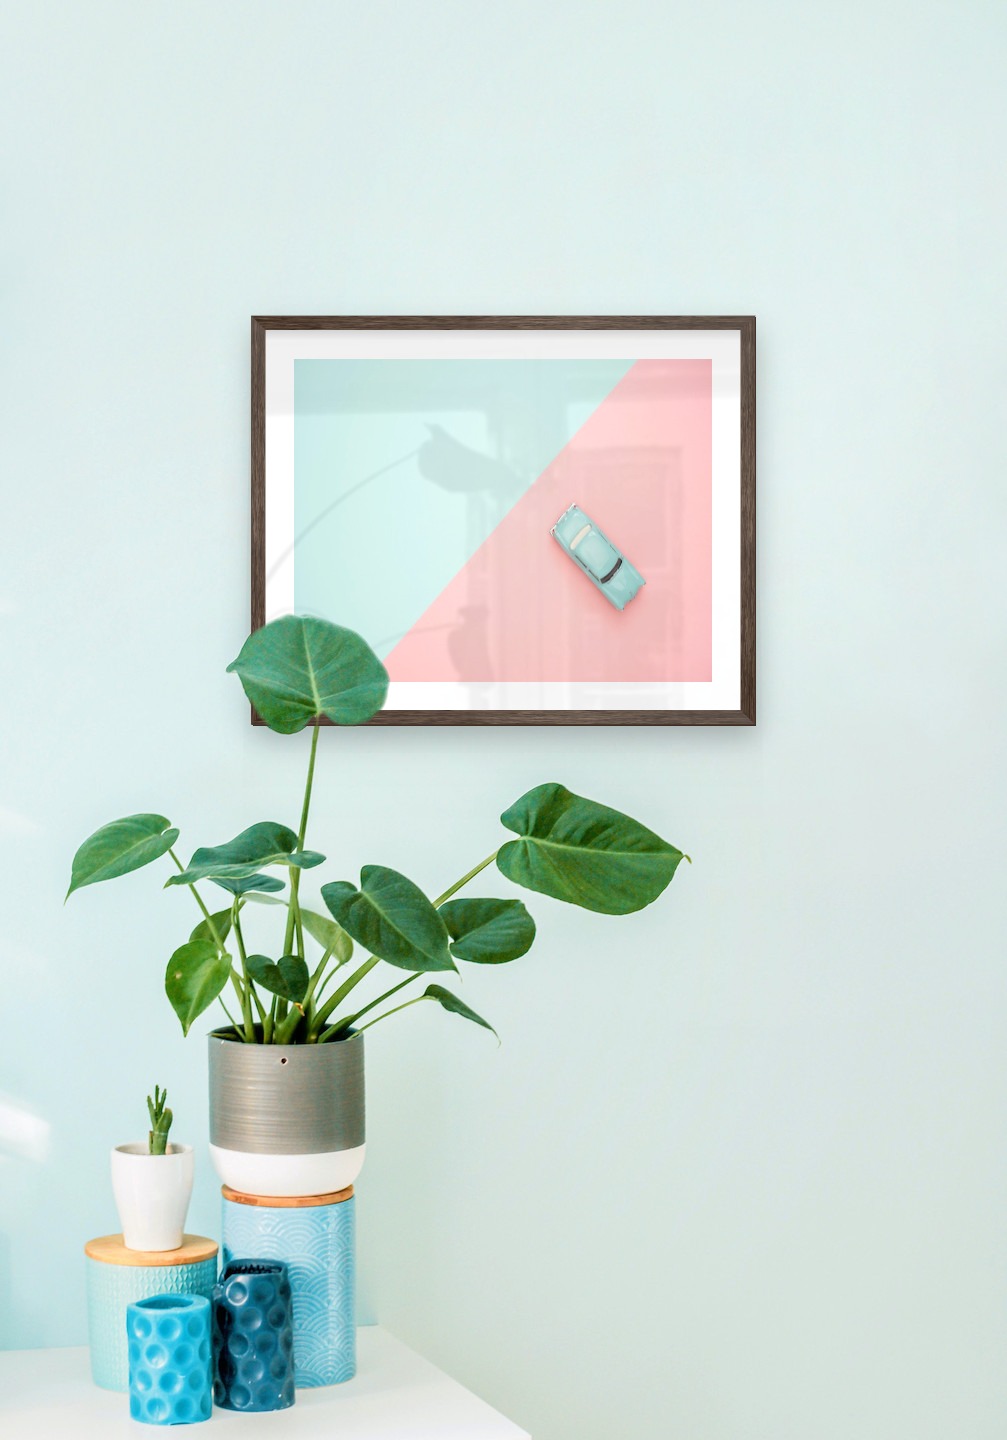 Gallery wall with picture frame in dark wood in size 40x50 with print "Blue car and pink"